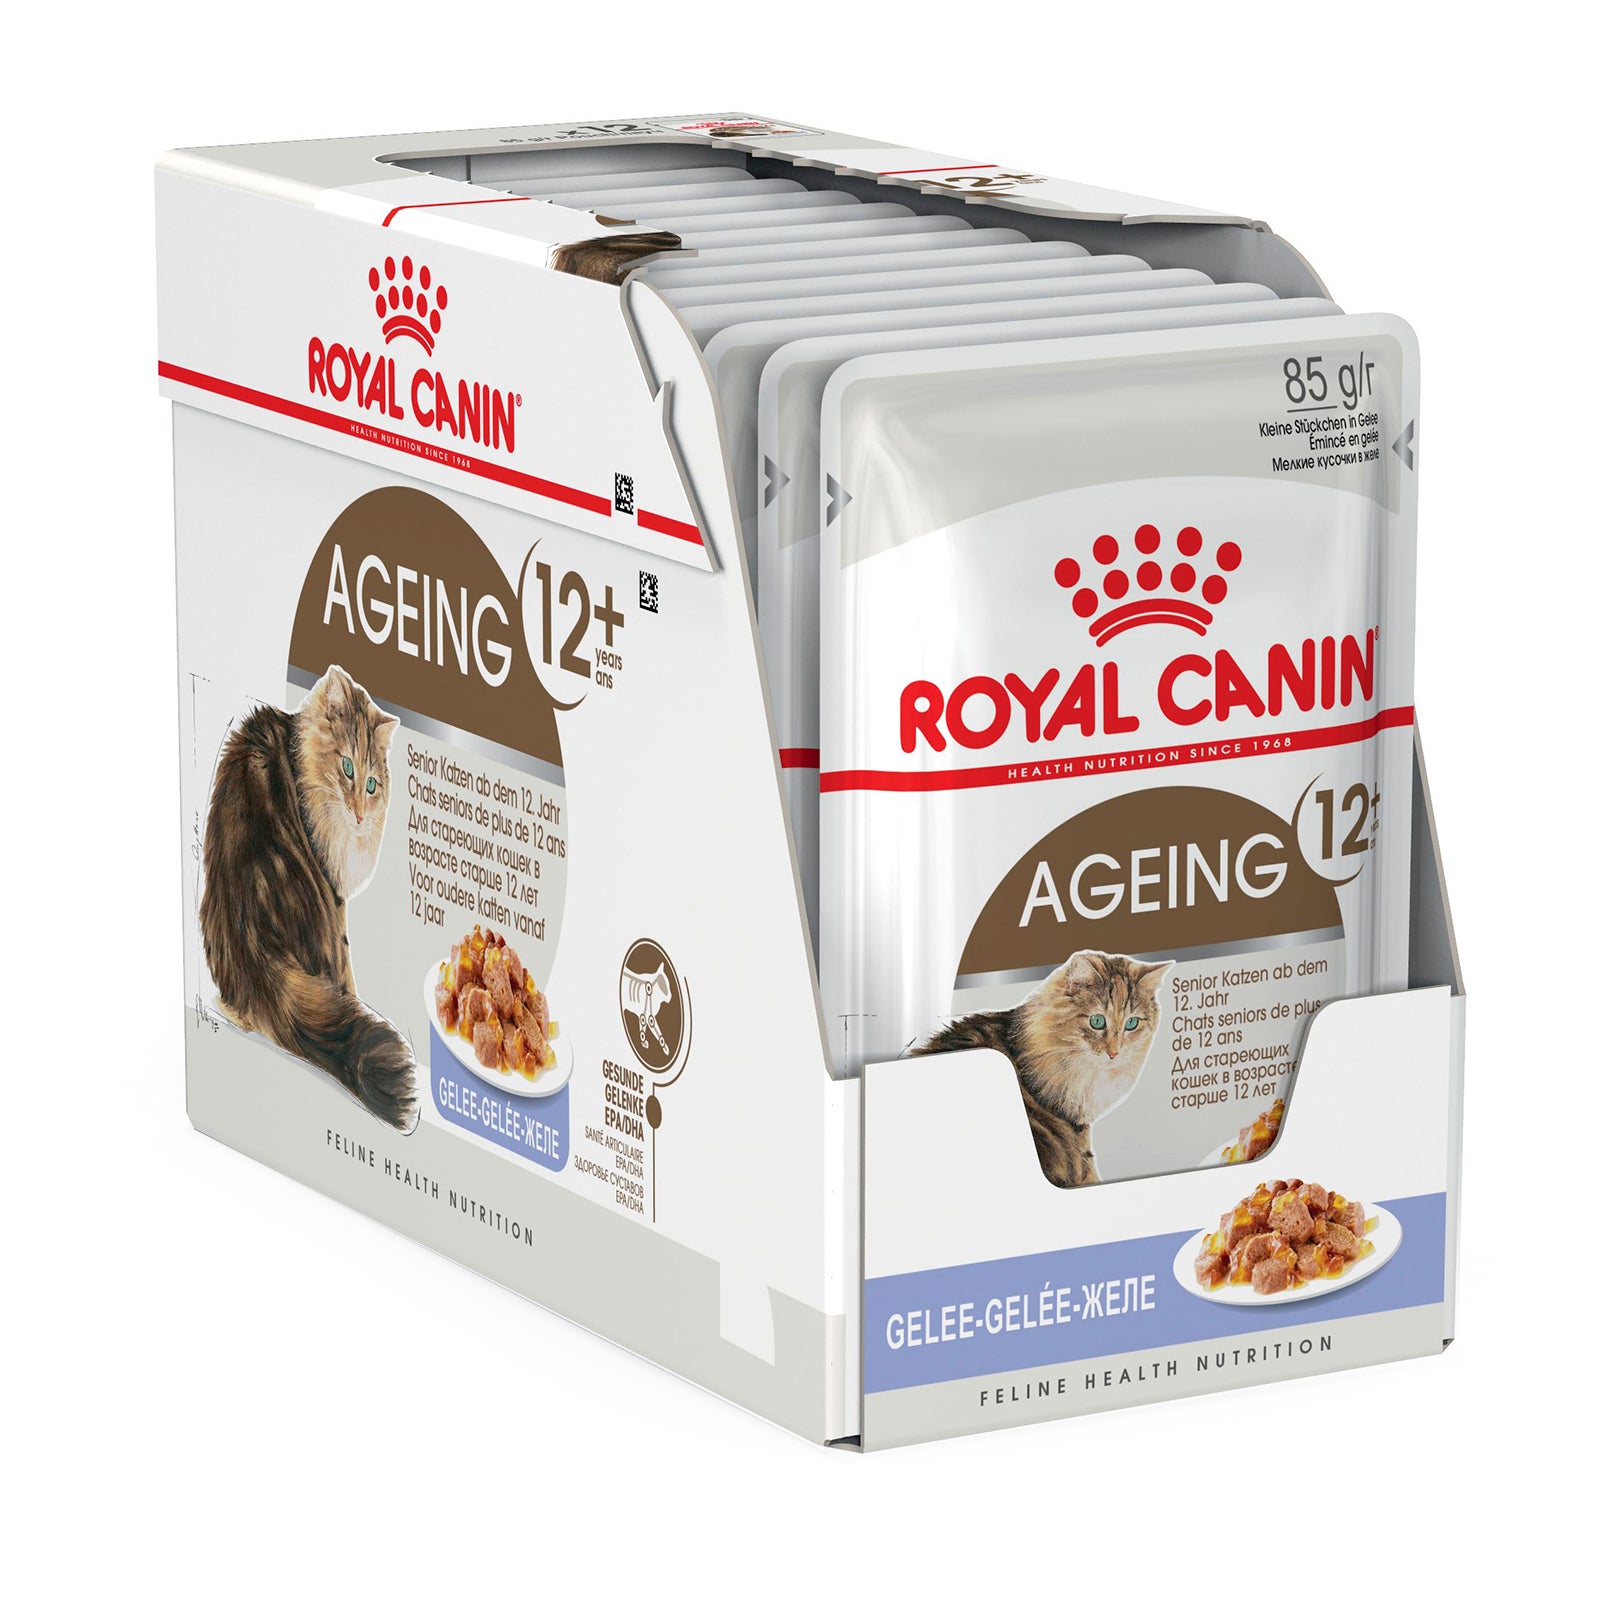 Royal Canin Cat Food Pouch Ageing 12+ Jelly